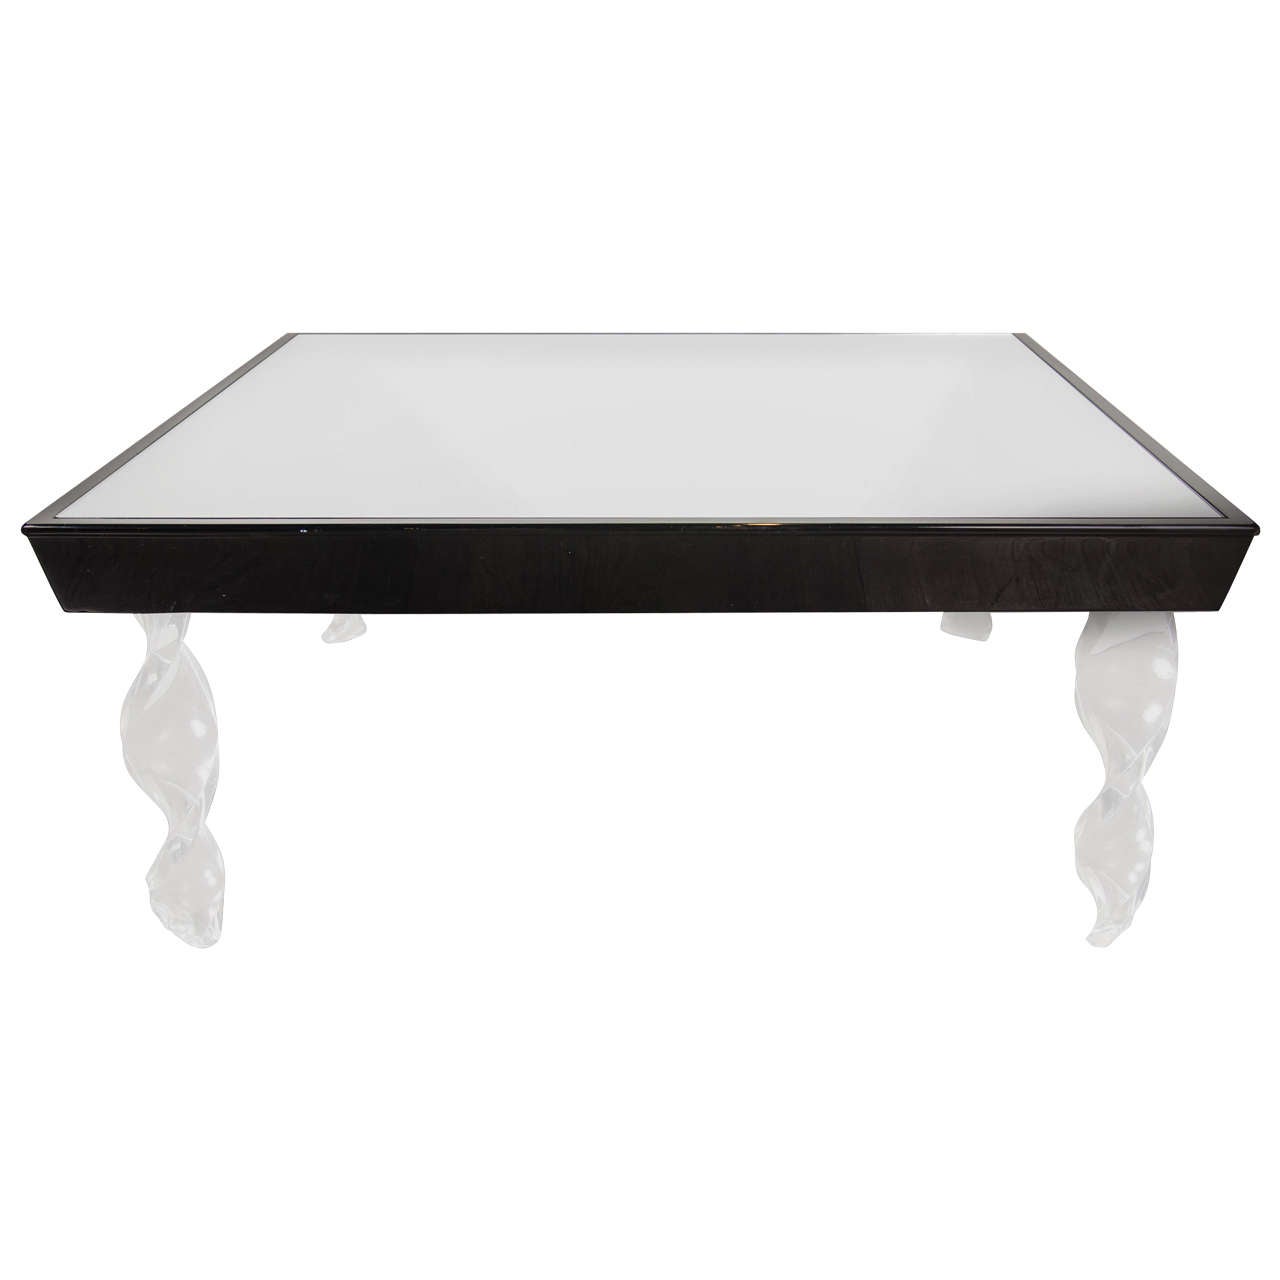 Art Deco Cocktail Table by Grosfeld House in Lucite, Black Lacquer and Mirror